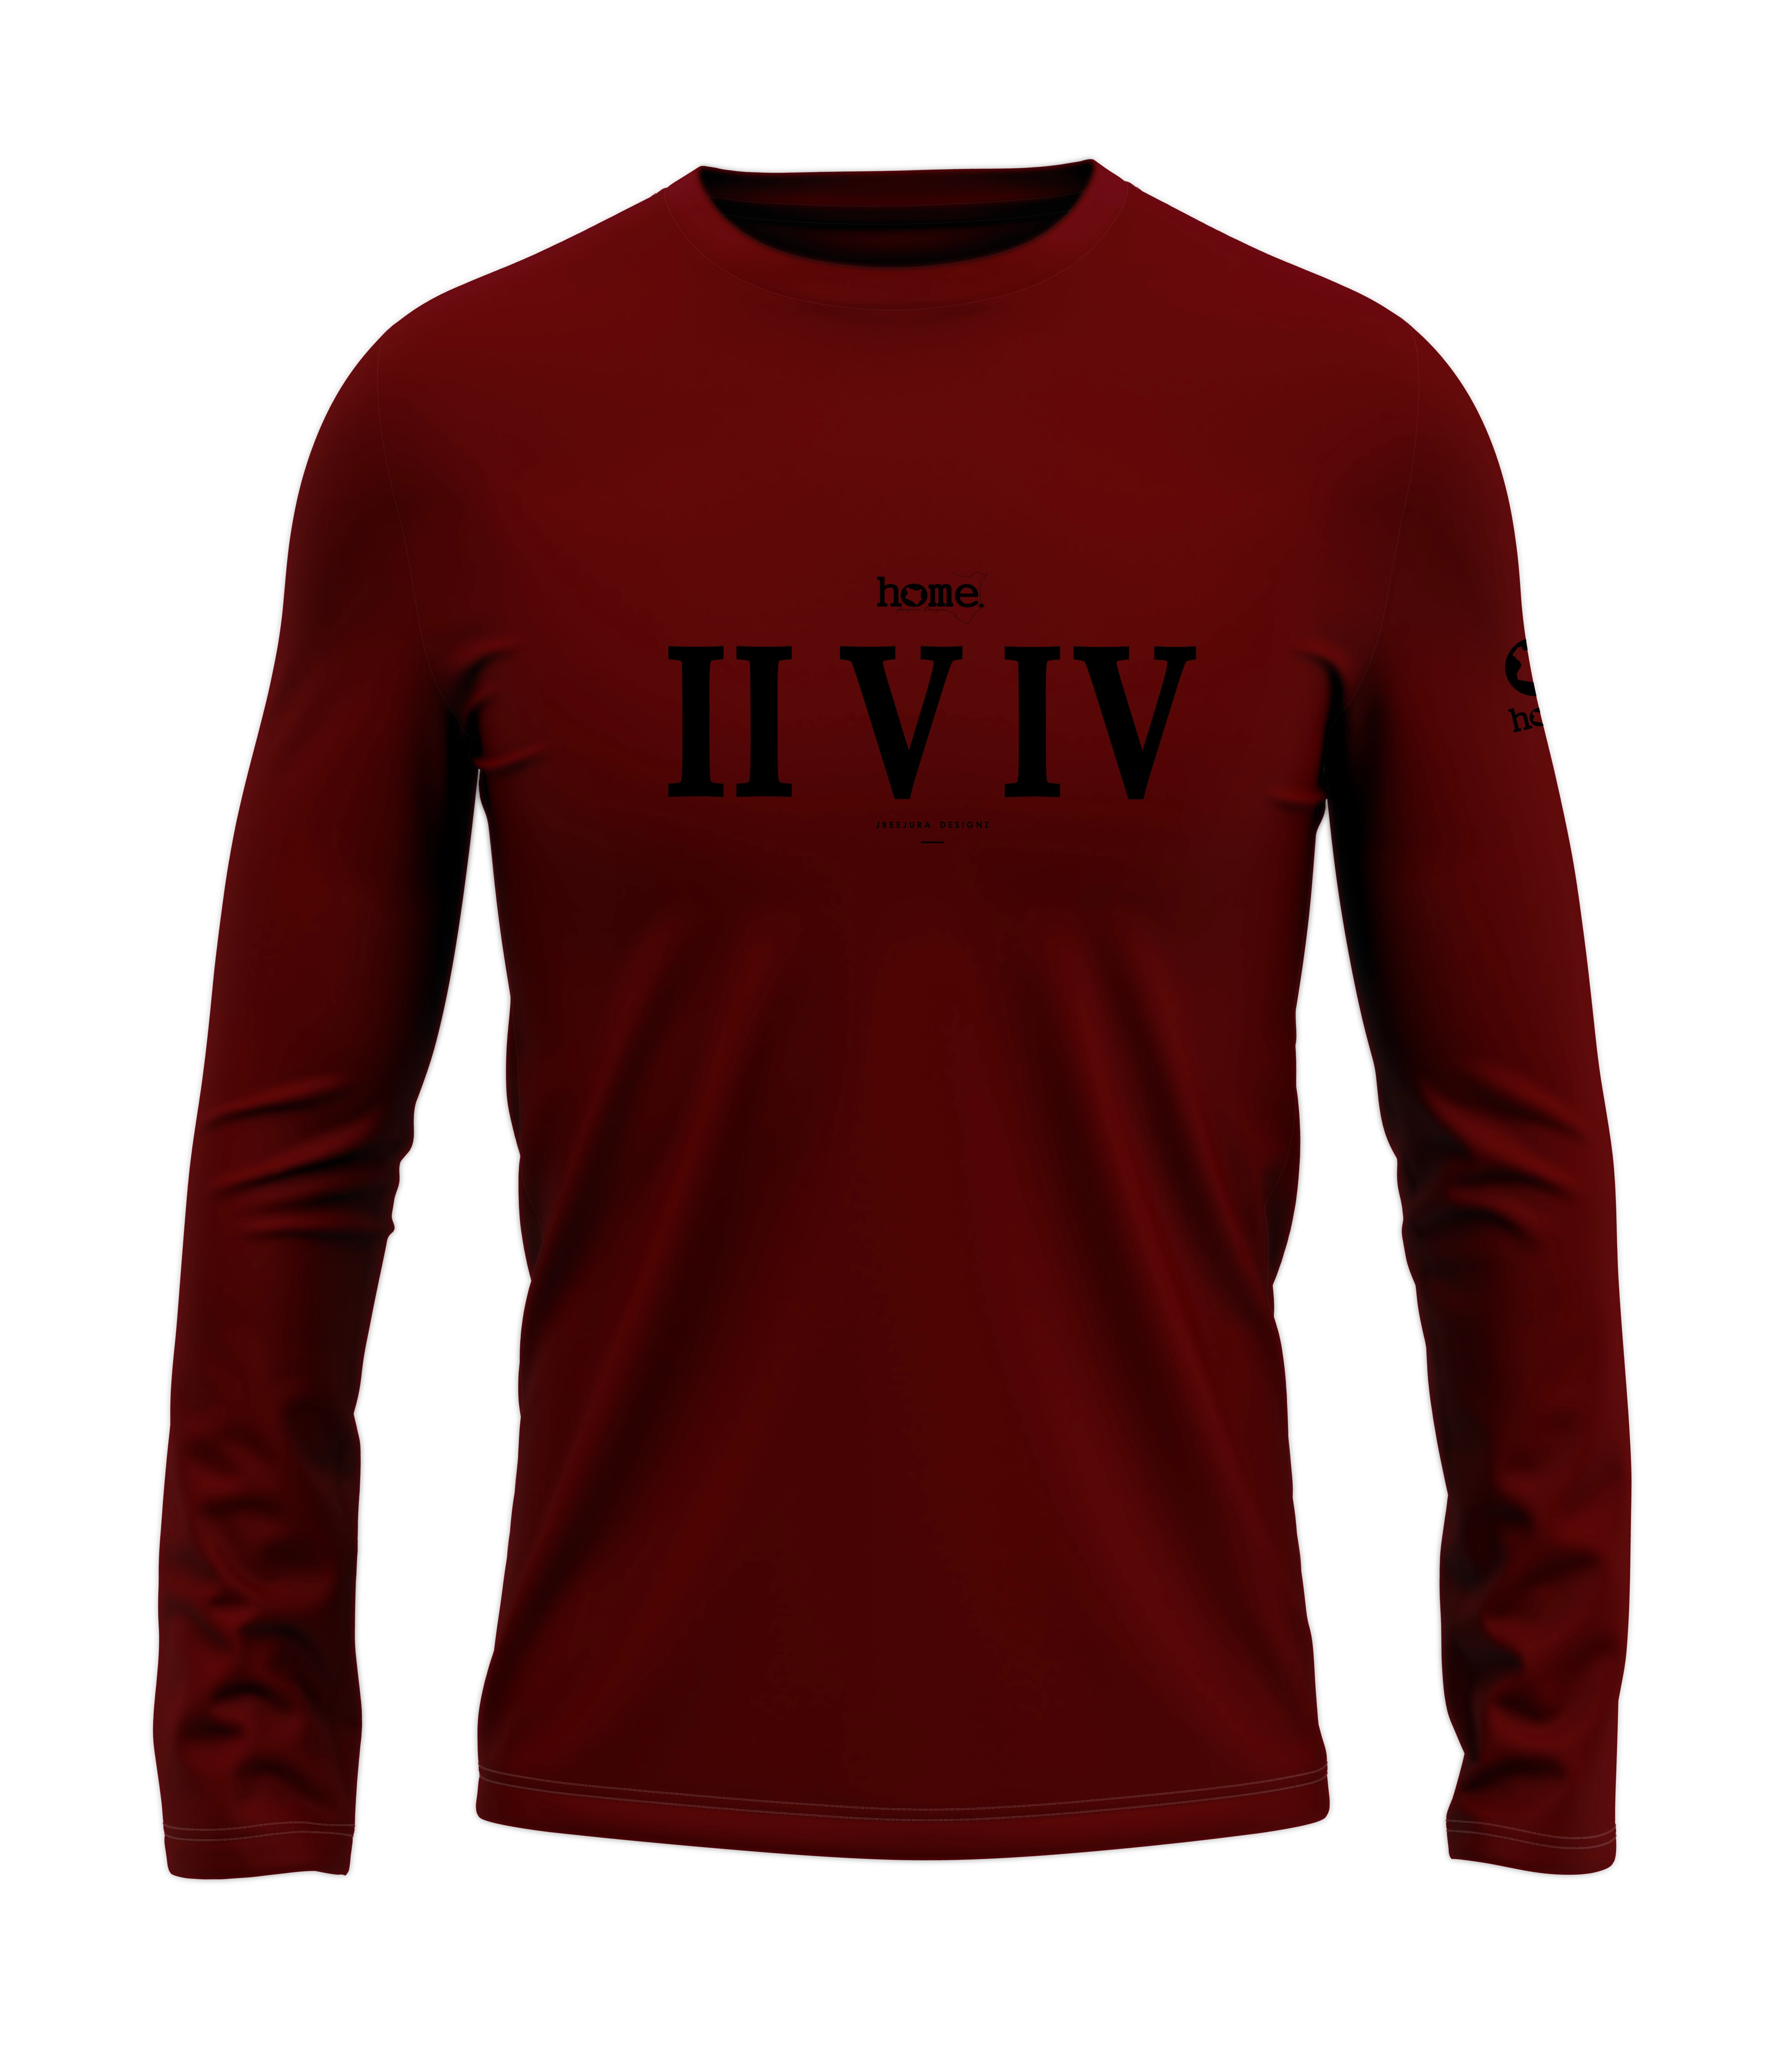 home_254 LONG-SLEEVED MAROON RED T-SHIRT WITH A BLACK ROMAN NUMERALS PRINT – COTTON PLUS FABRIC